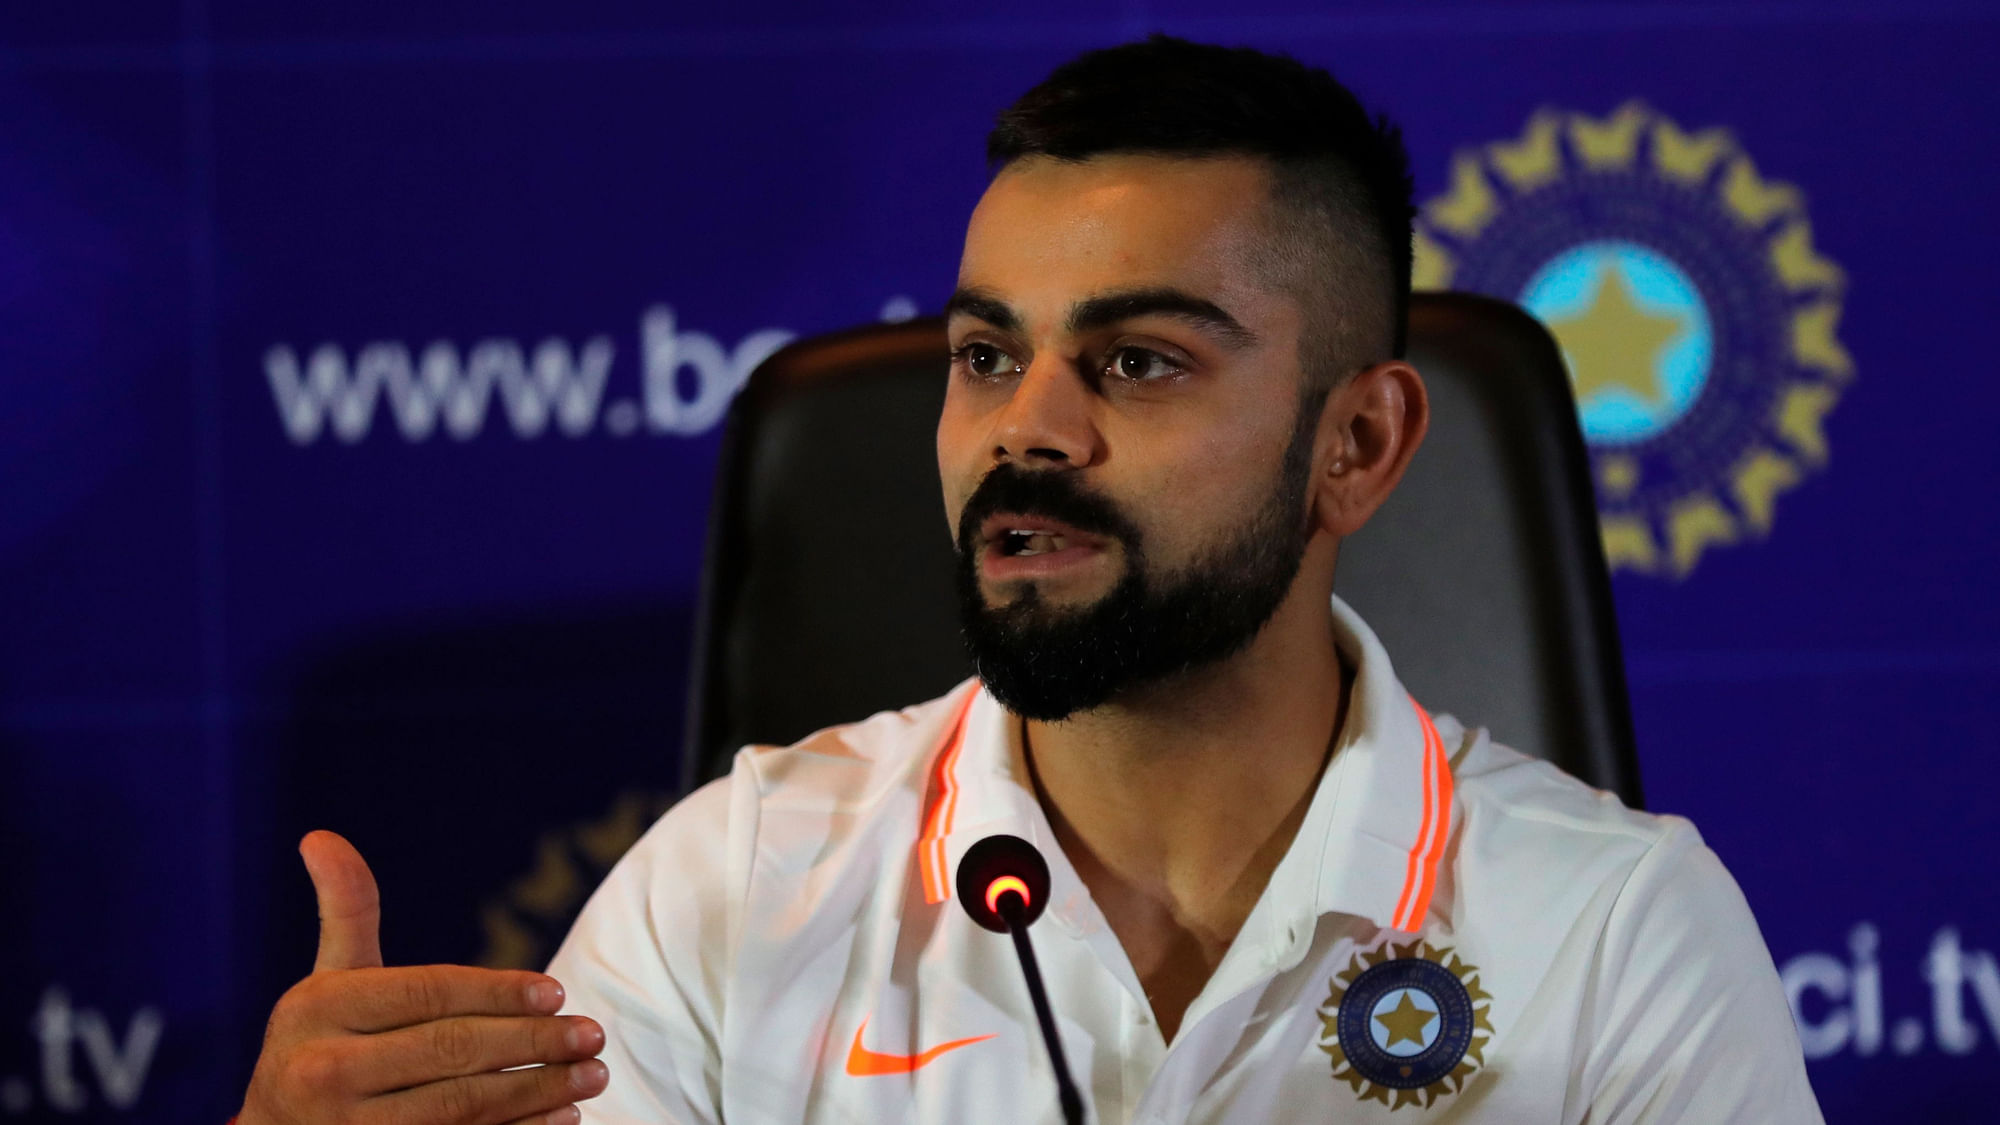 Indian cricket captain Virat Kohli has endorsed Toyota, Audi, TVS and Uber among others in the past.